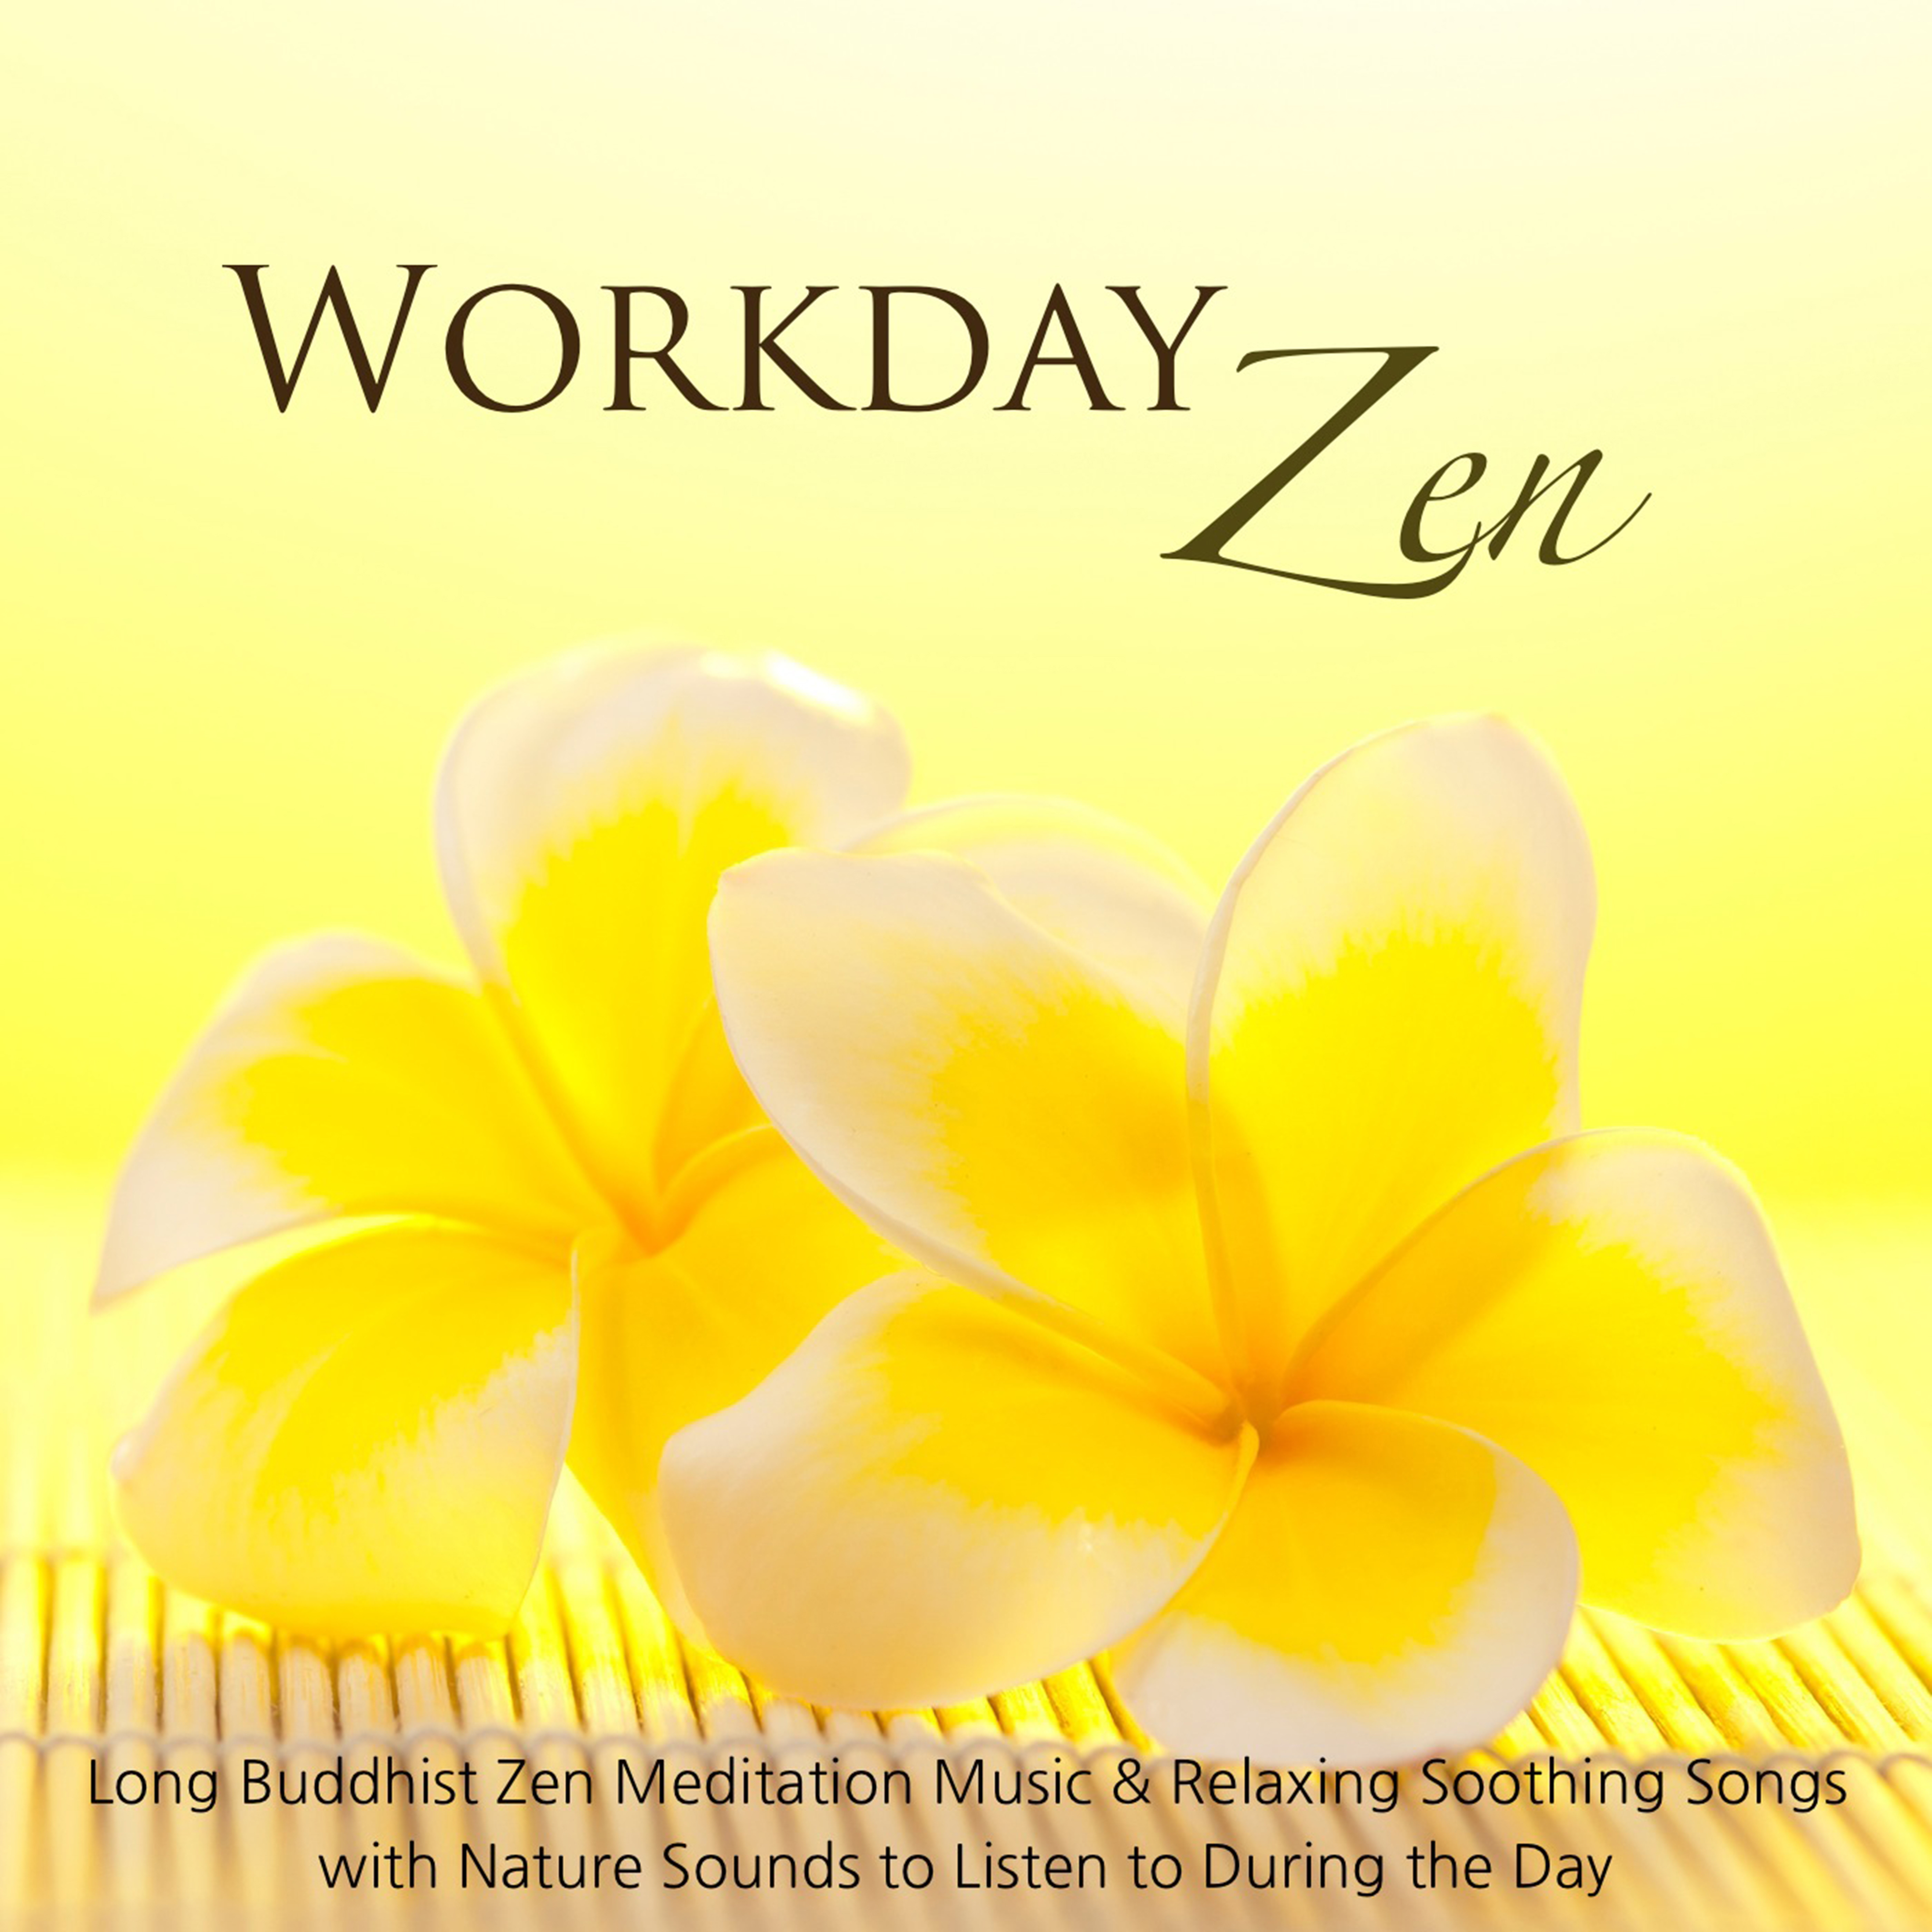 Workday Zen - Long Buddhist Zen Meditation Music & Relaxing Soothing Songs With Nature Sounds to Listen to During the Day